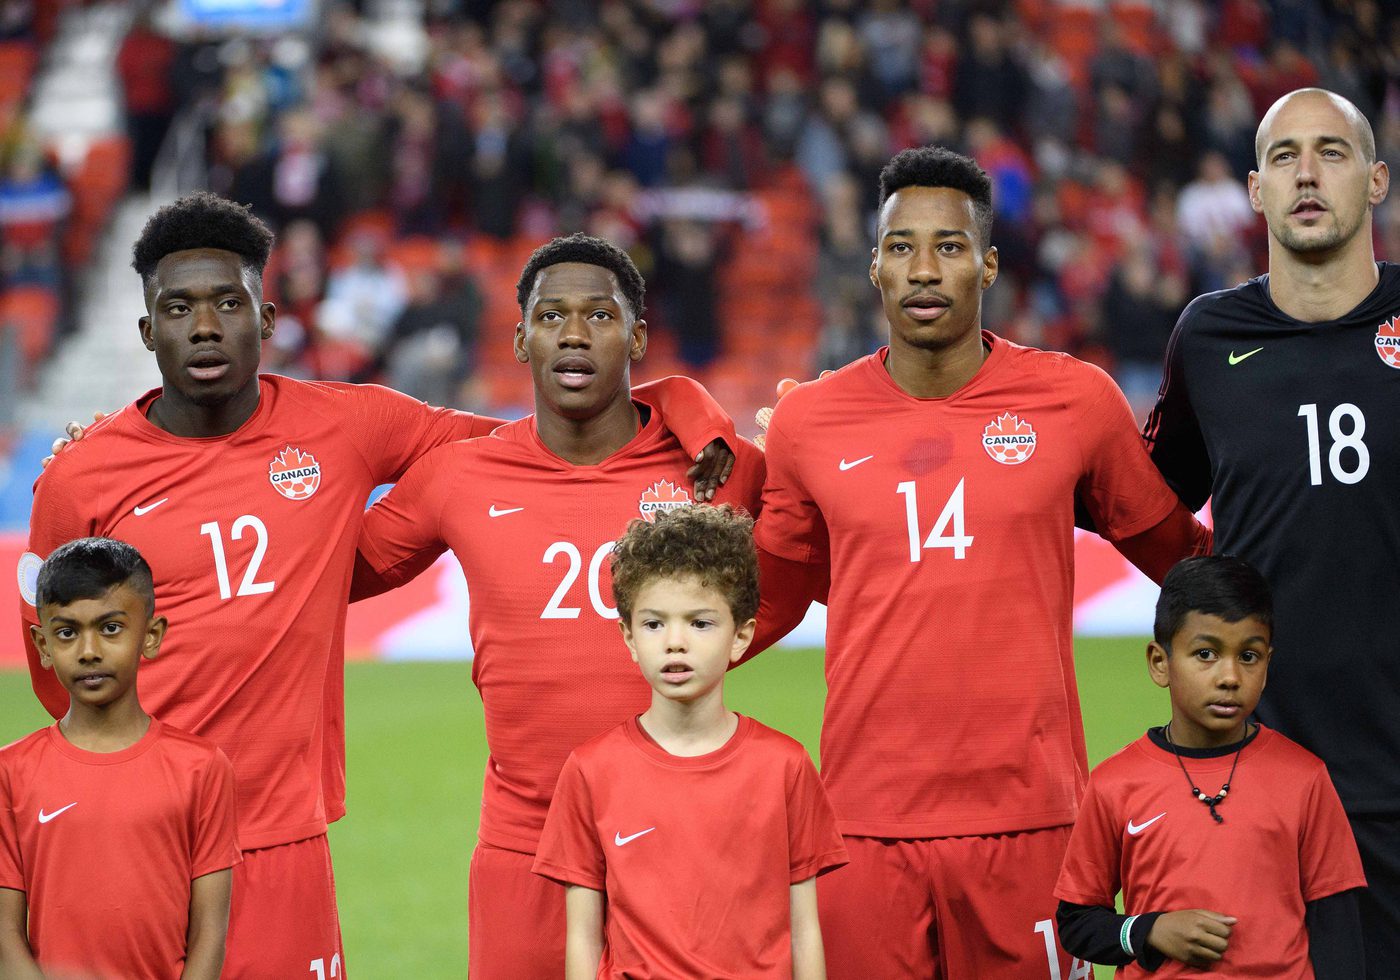 Oct 15, 2019; Toronto, Ontario, CAN; Canada midfielder Alphonso Davies (12) stands with the player escorts during the national anthems before a CONCACAF Nations League soccer match against the USA at BMO Field. Mandatory Credit: Nick Turchiaro-USA TODAY Sports